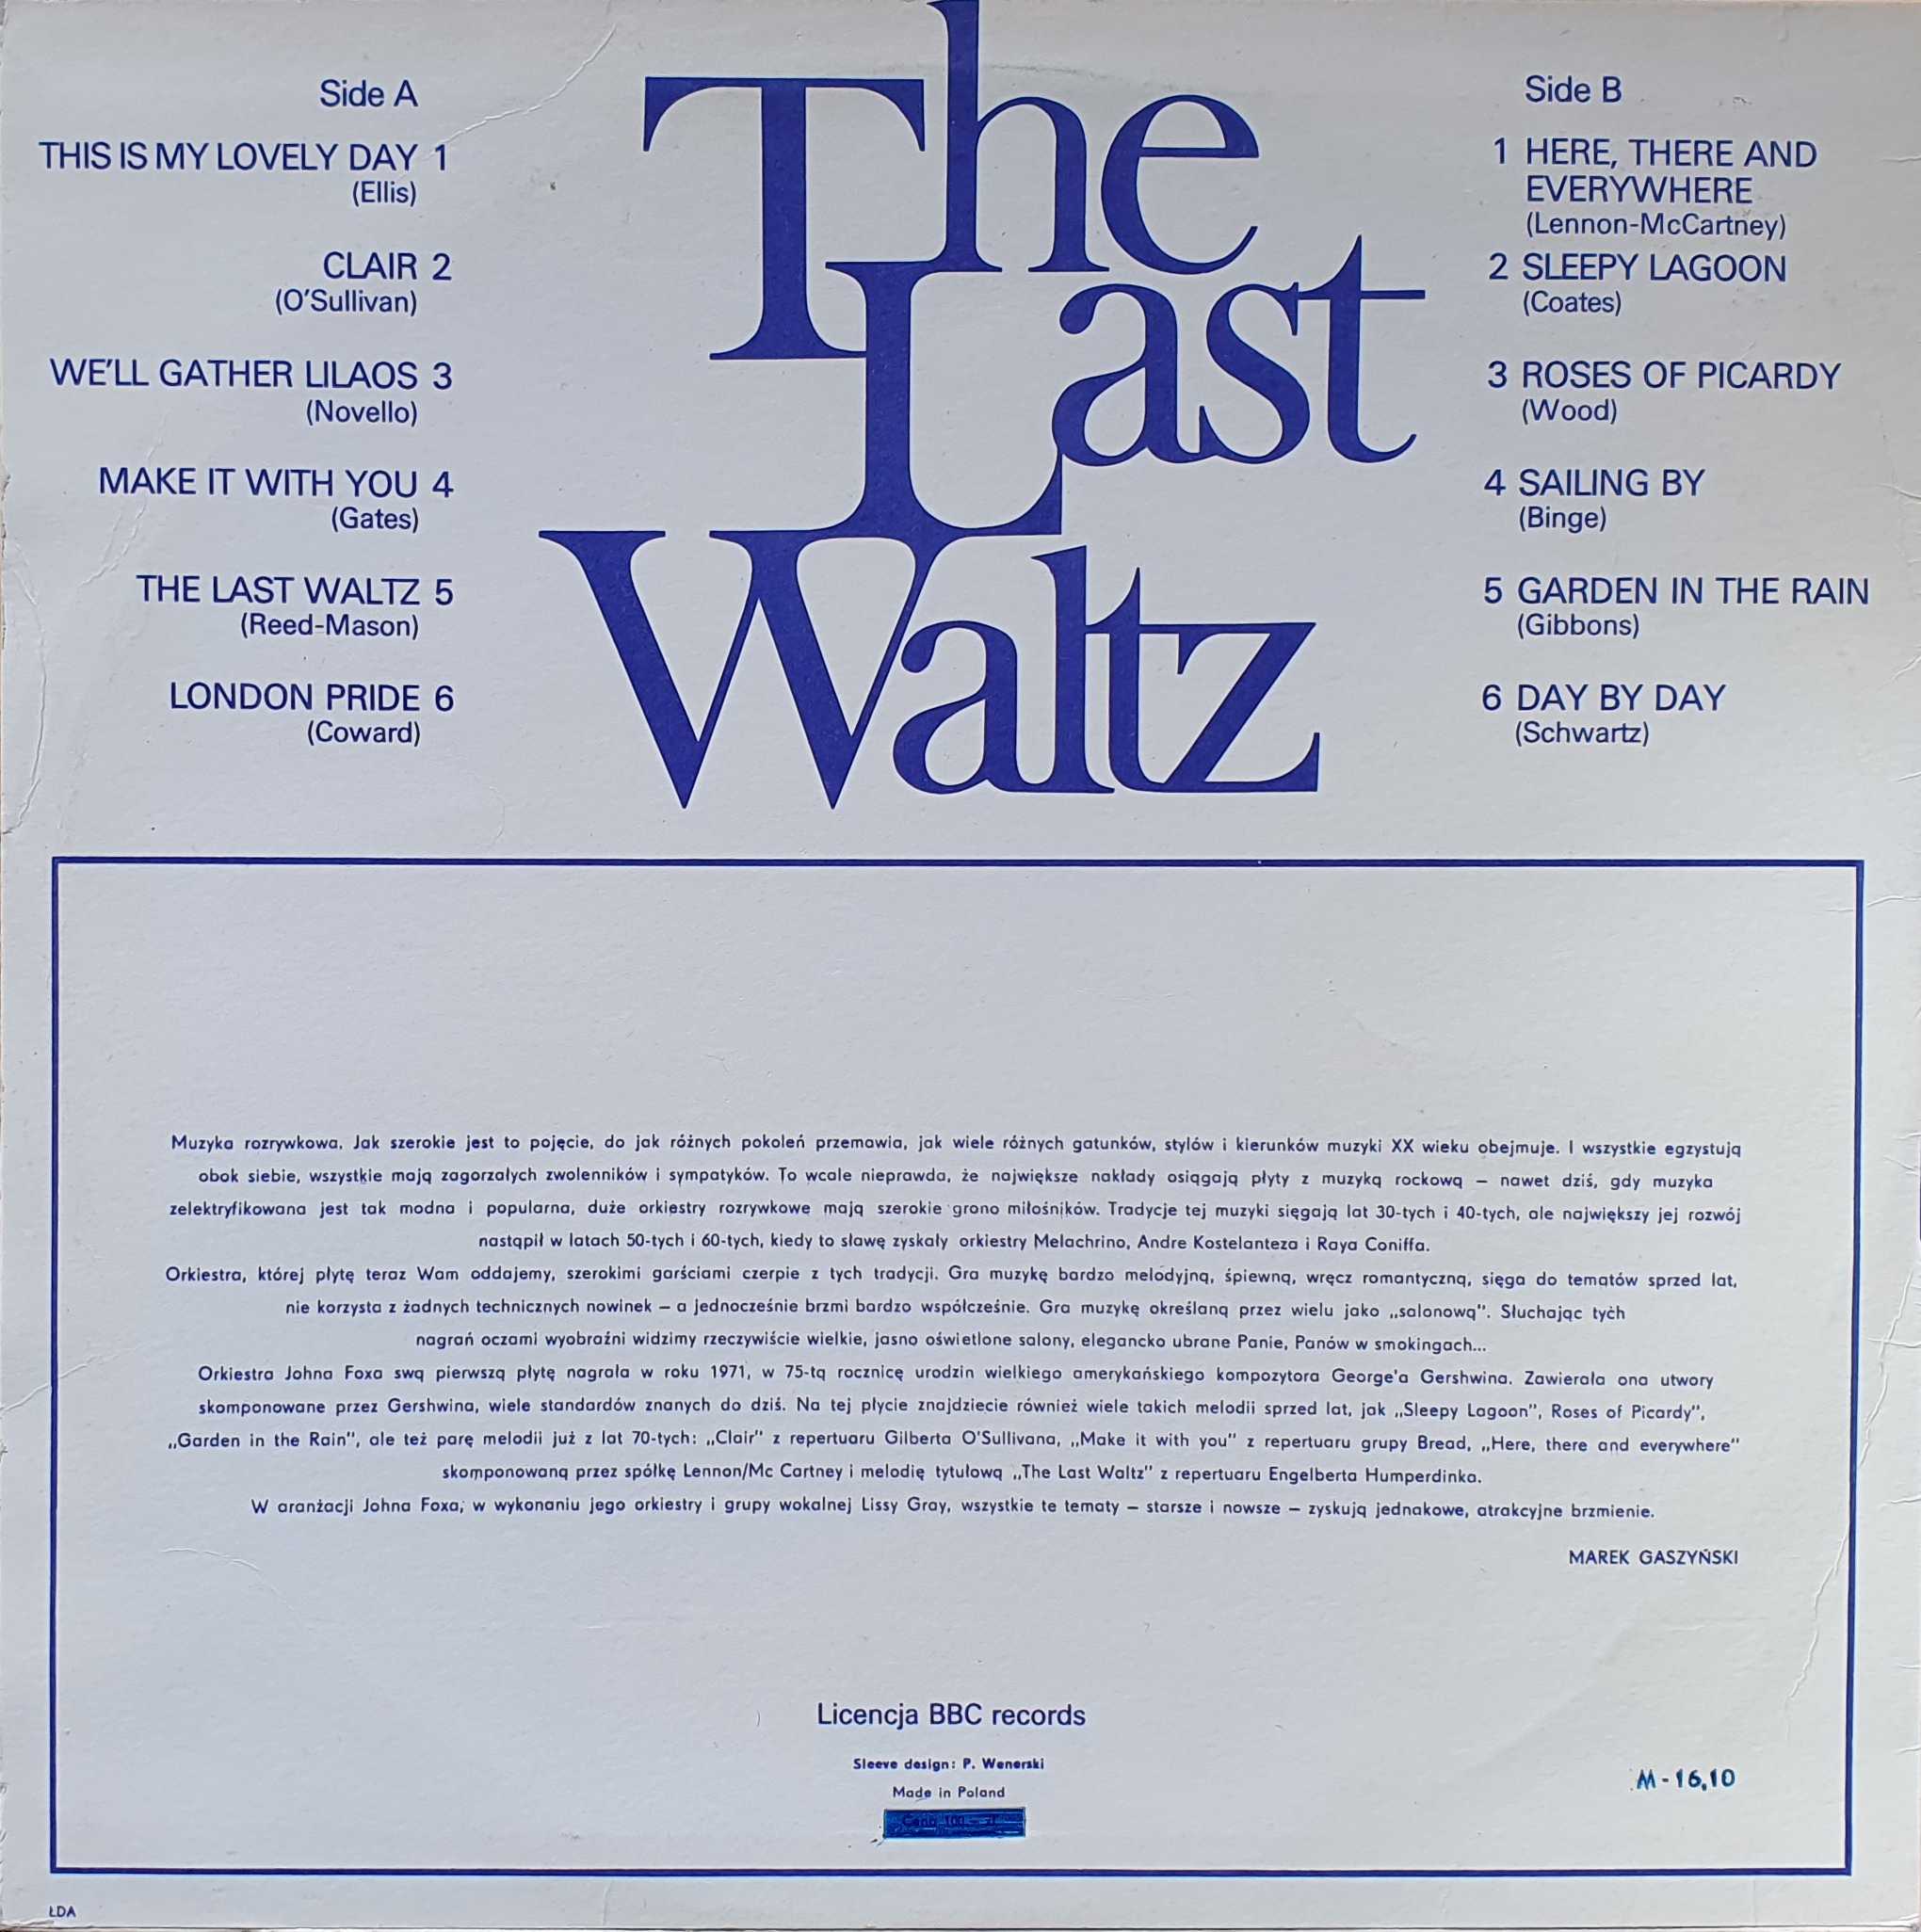 Picture of SX 1790 The last waltz by artist Various / The John Fox Orchestra from the BBC records and Tapes library